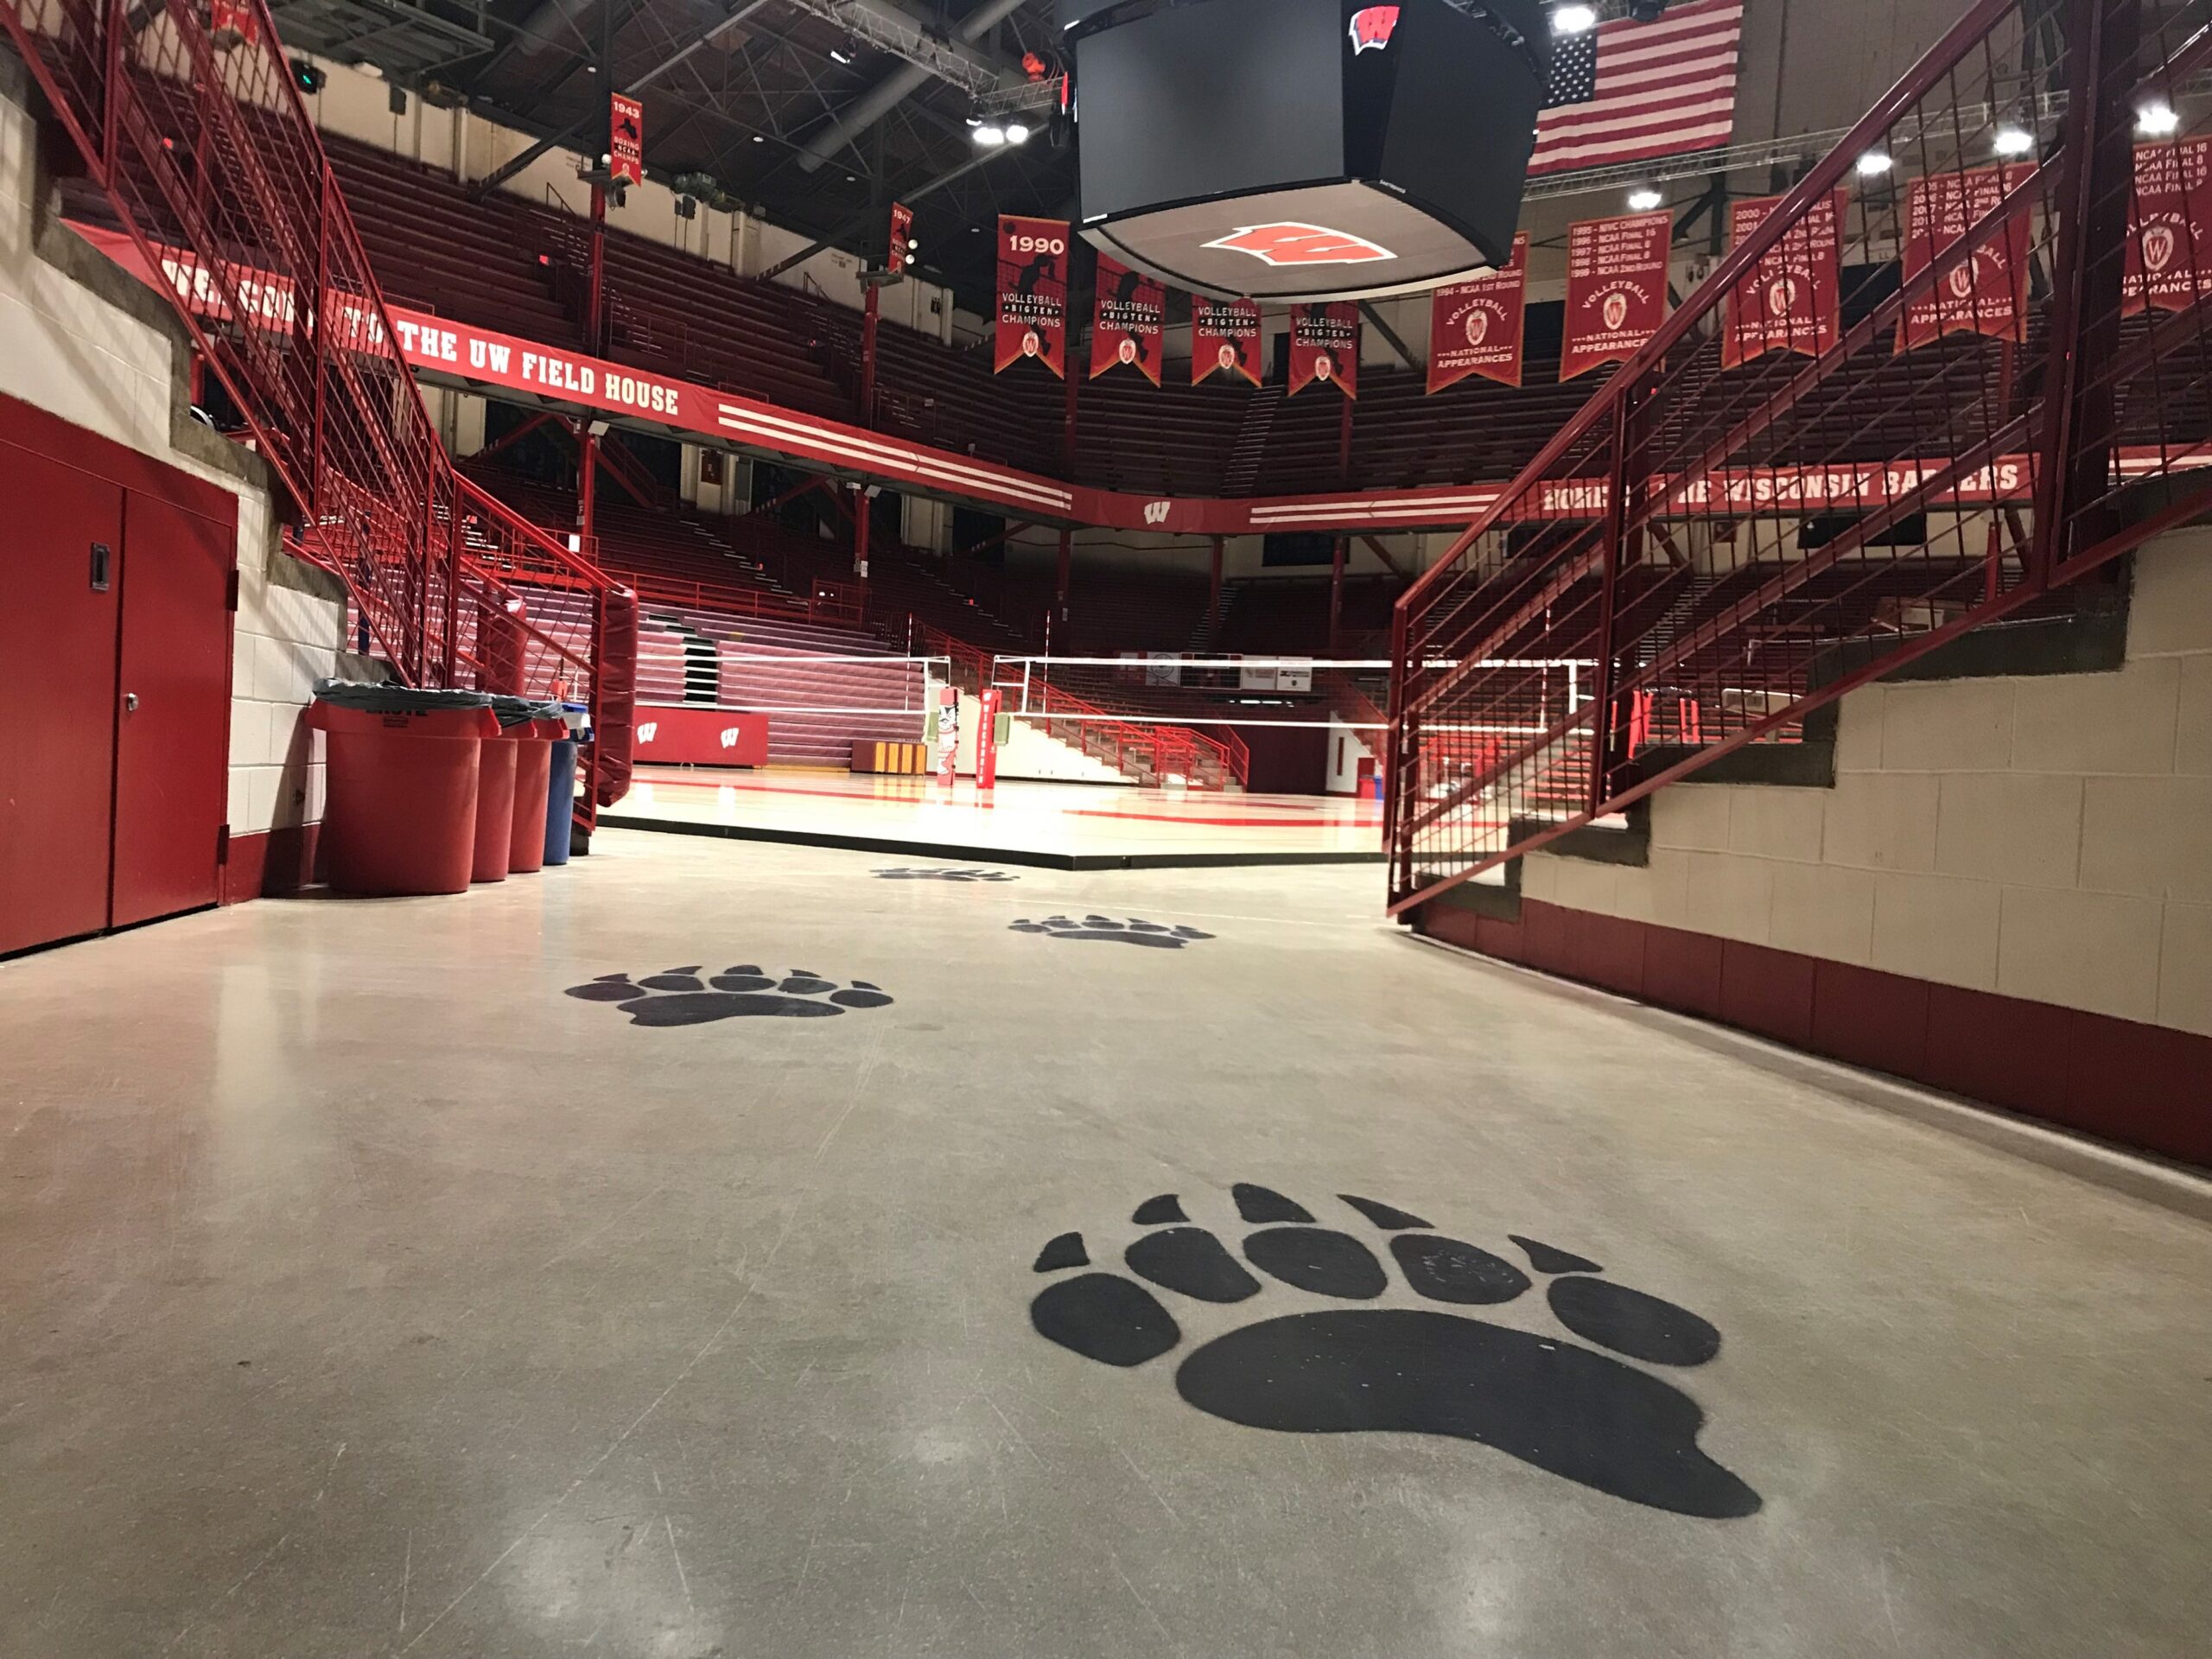 Big, black badger footprints painted on the floor lead to a volleyball court. The arena is all Wisconsin red and white.